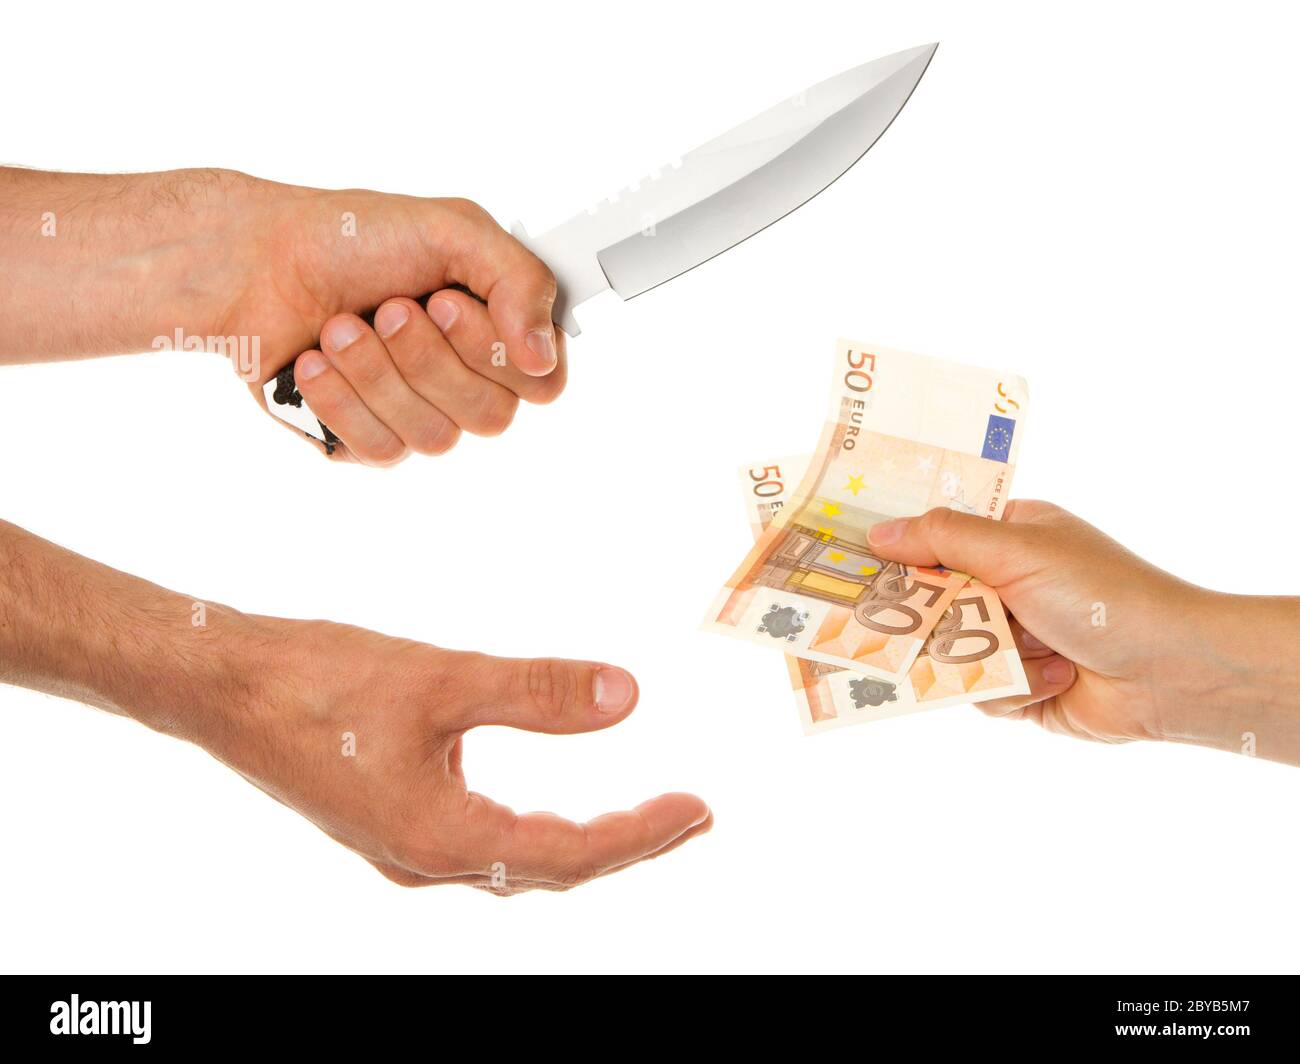 Man with knife threatening a woman Stock Photo